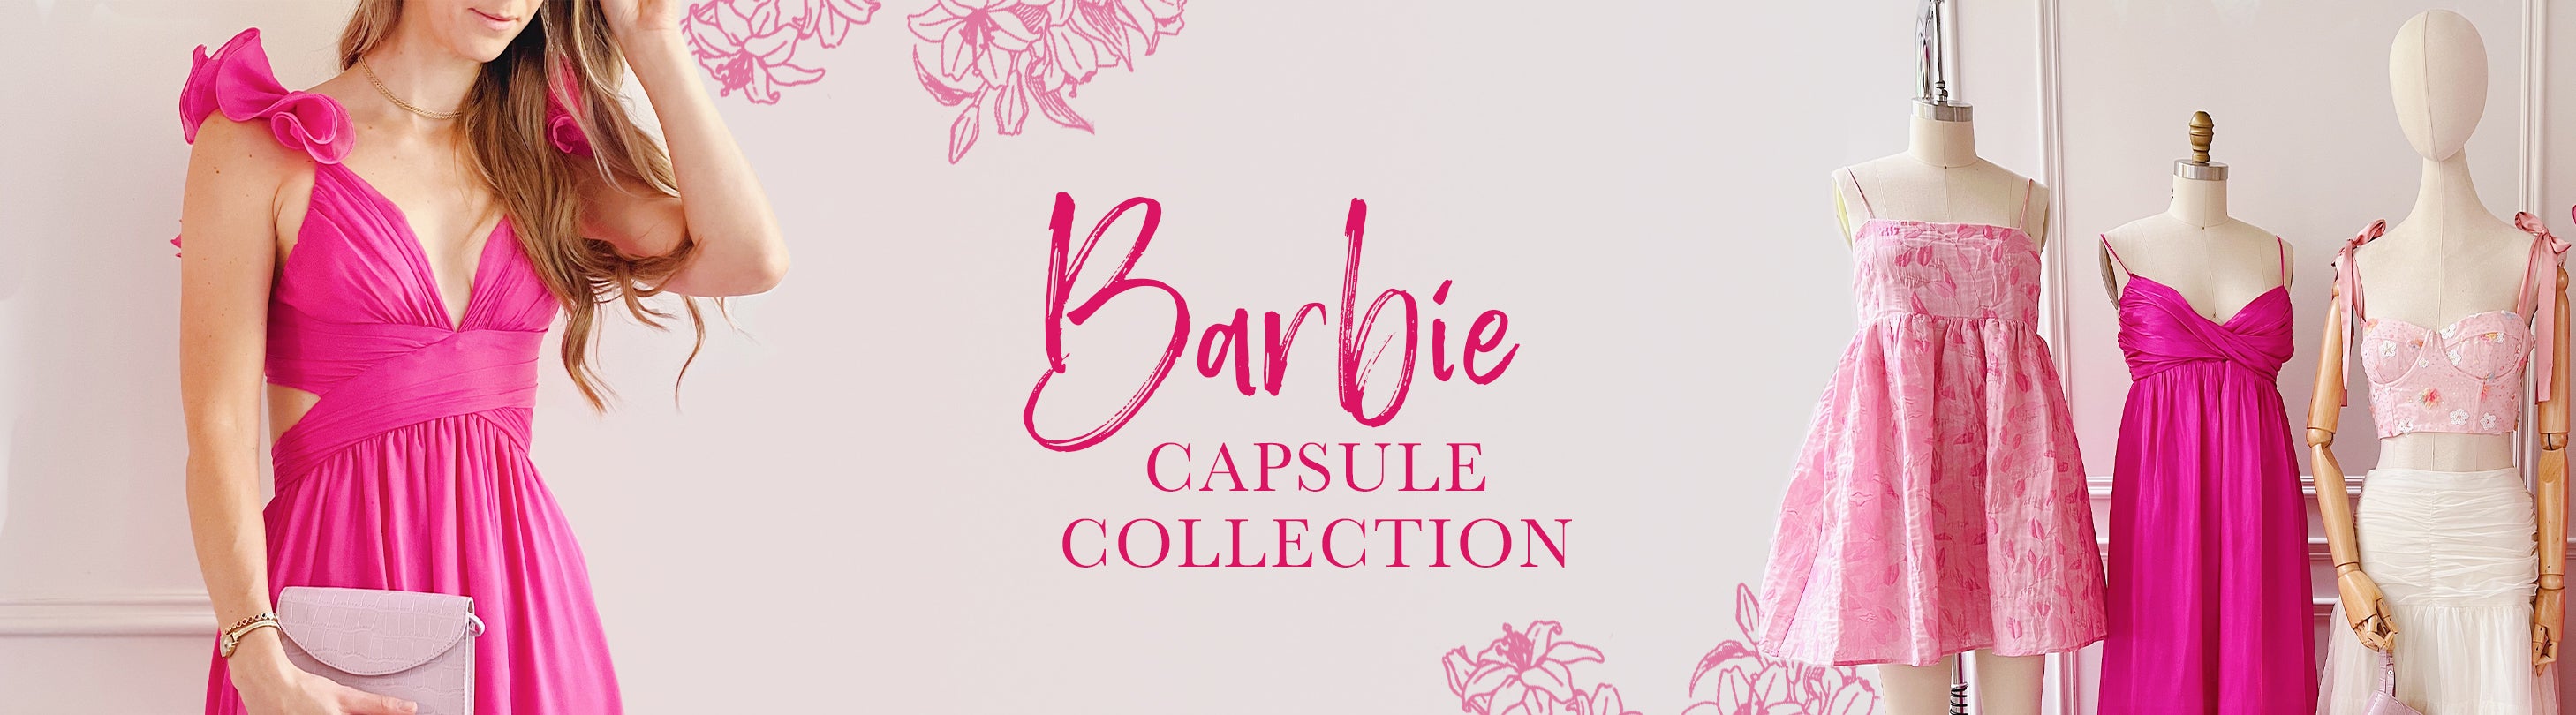 Barbie Capsule Collection